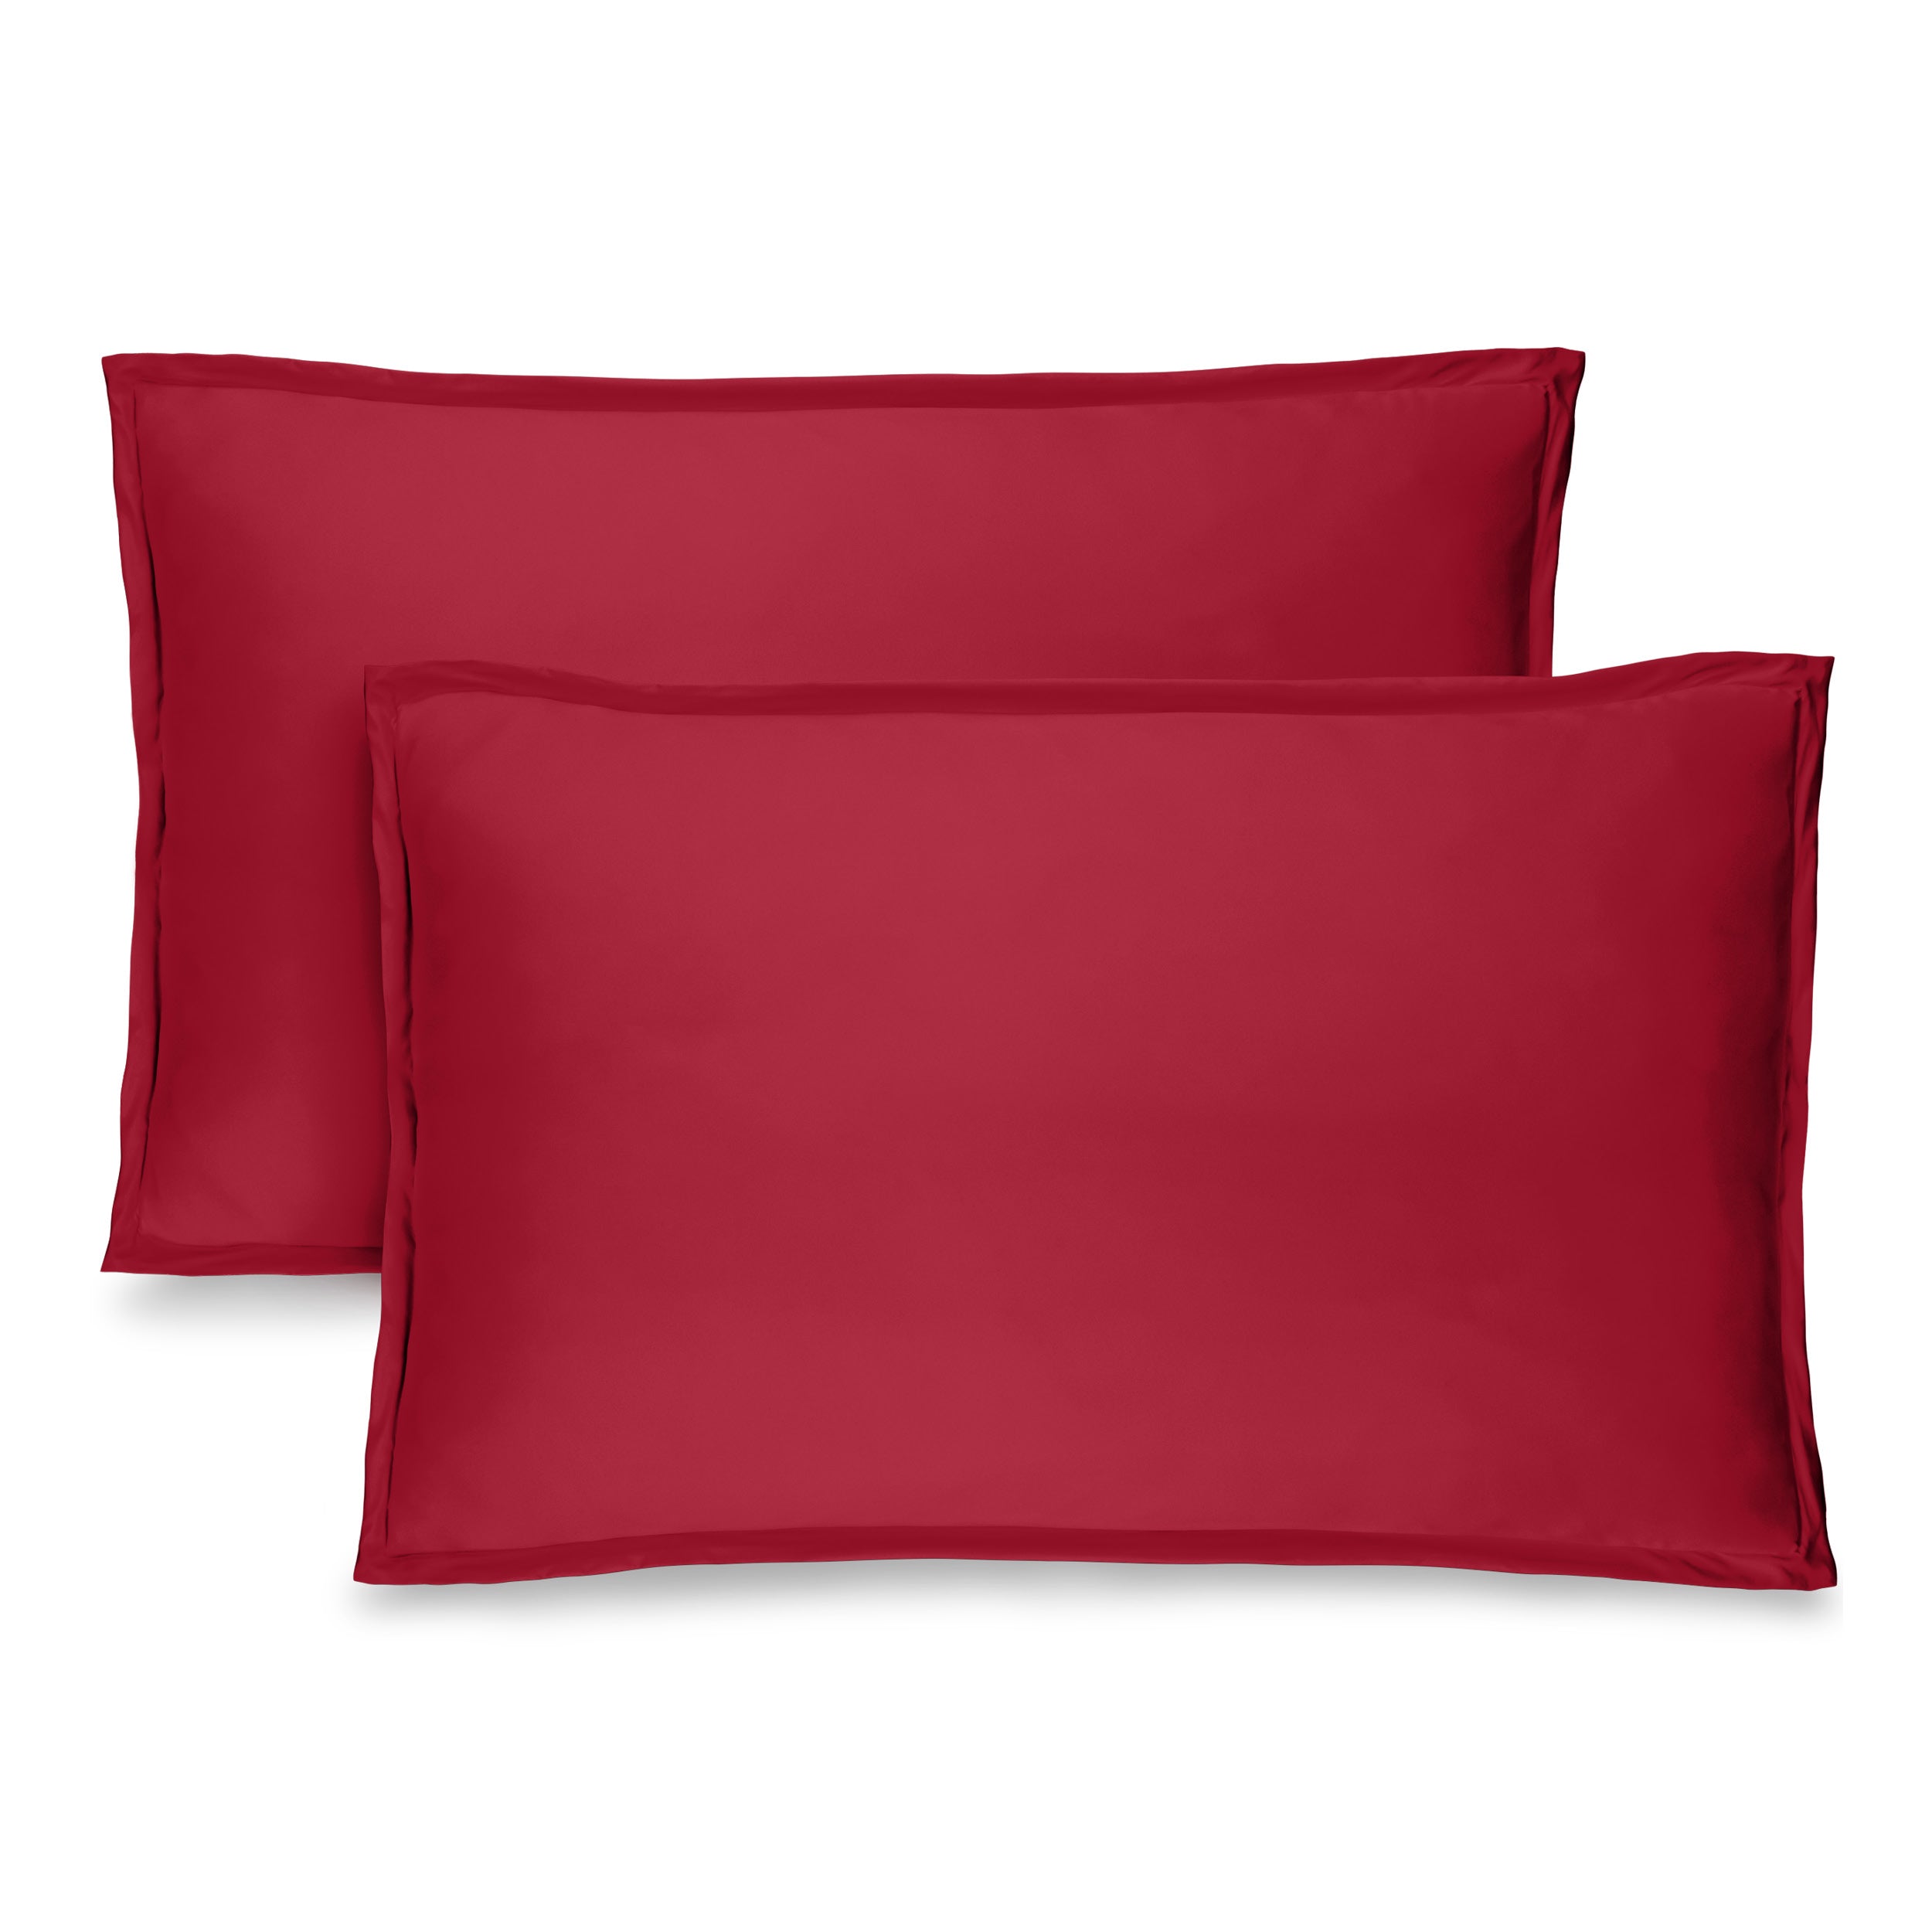 Two red pillow shams on pillows standing up with one behind the other